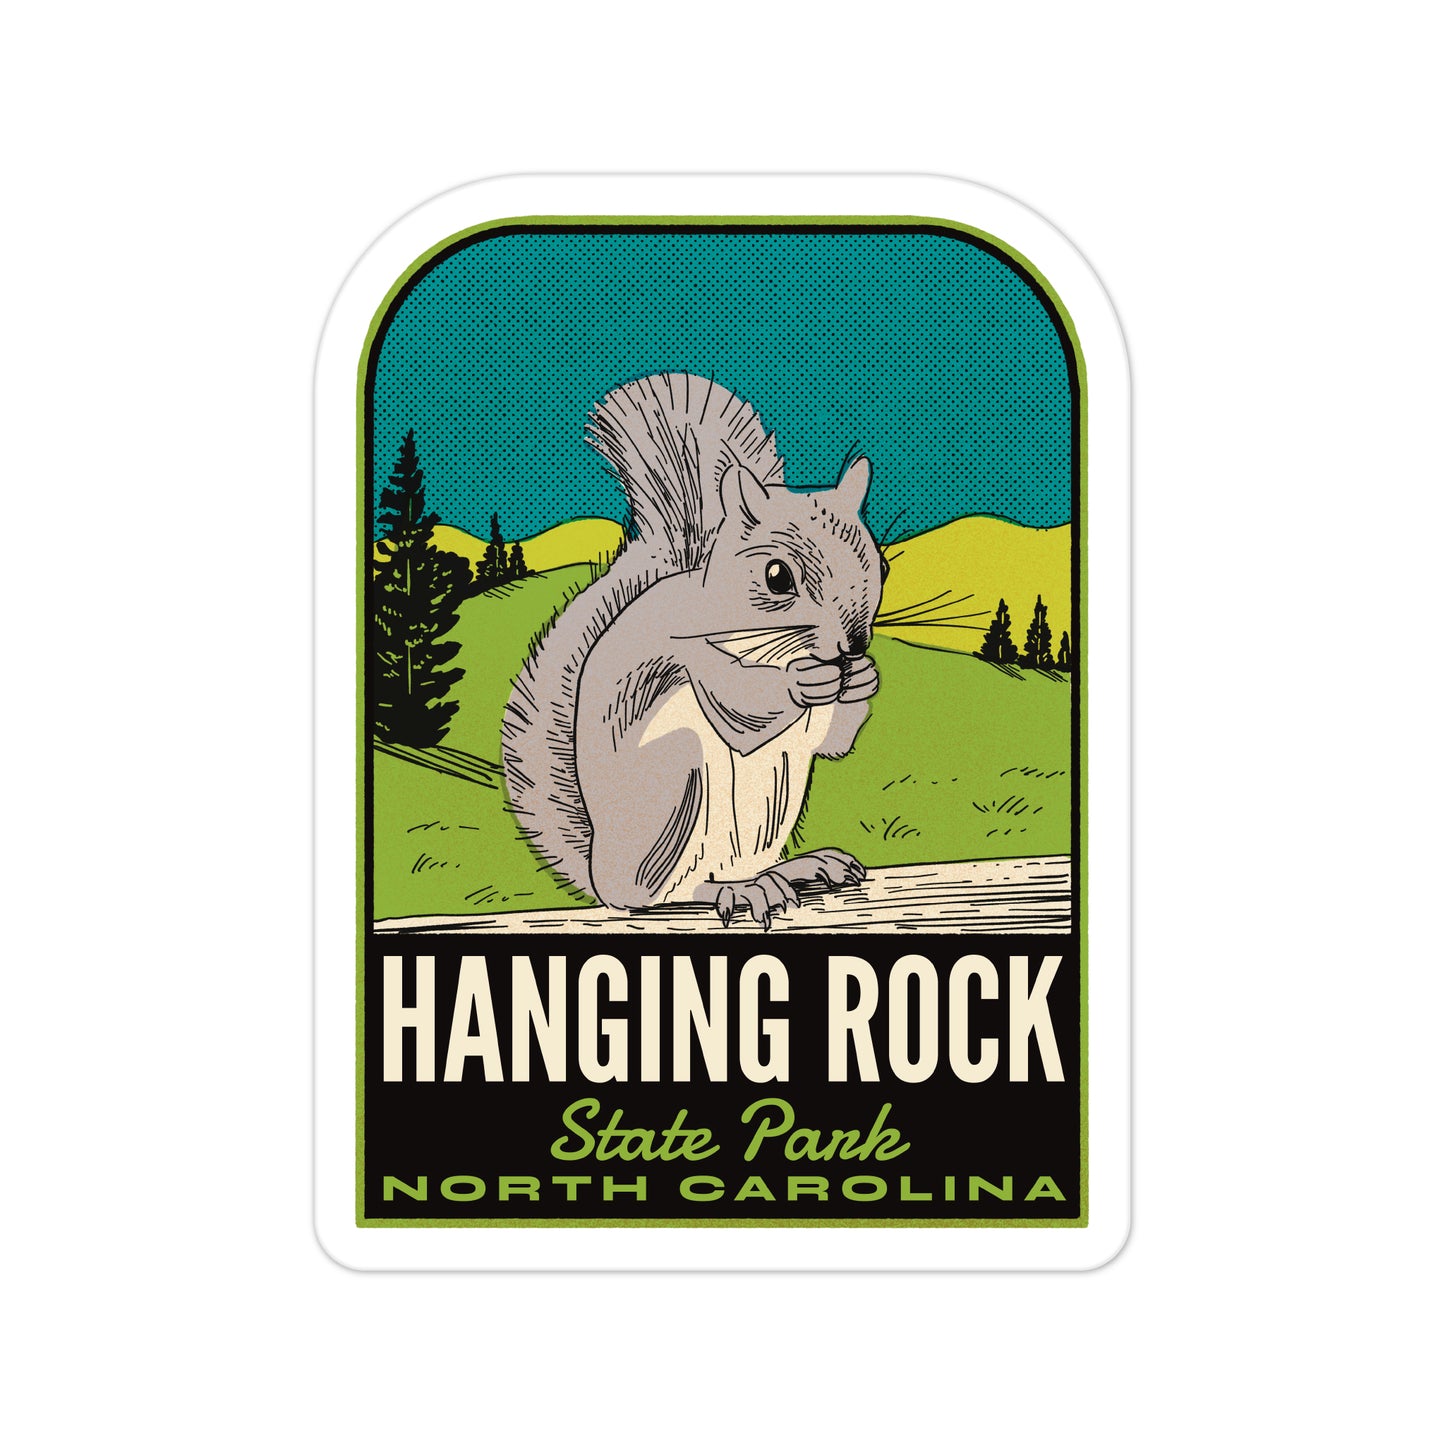 A sticker of Hanging Rock State Park